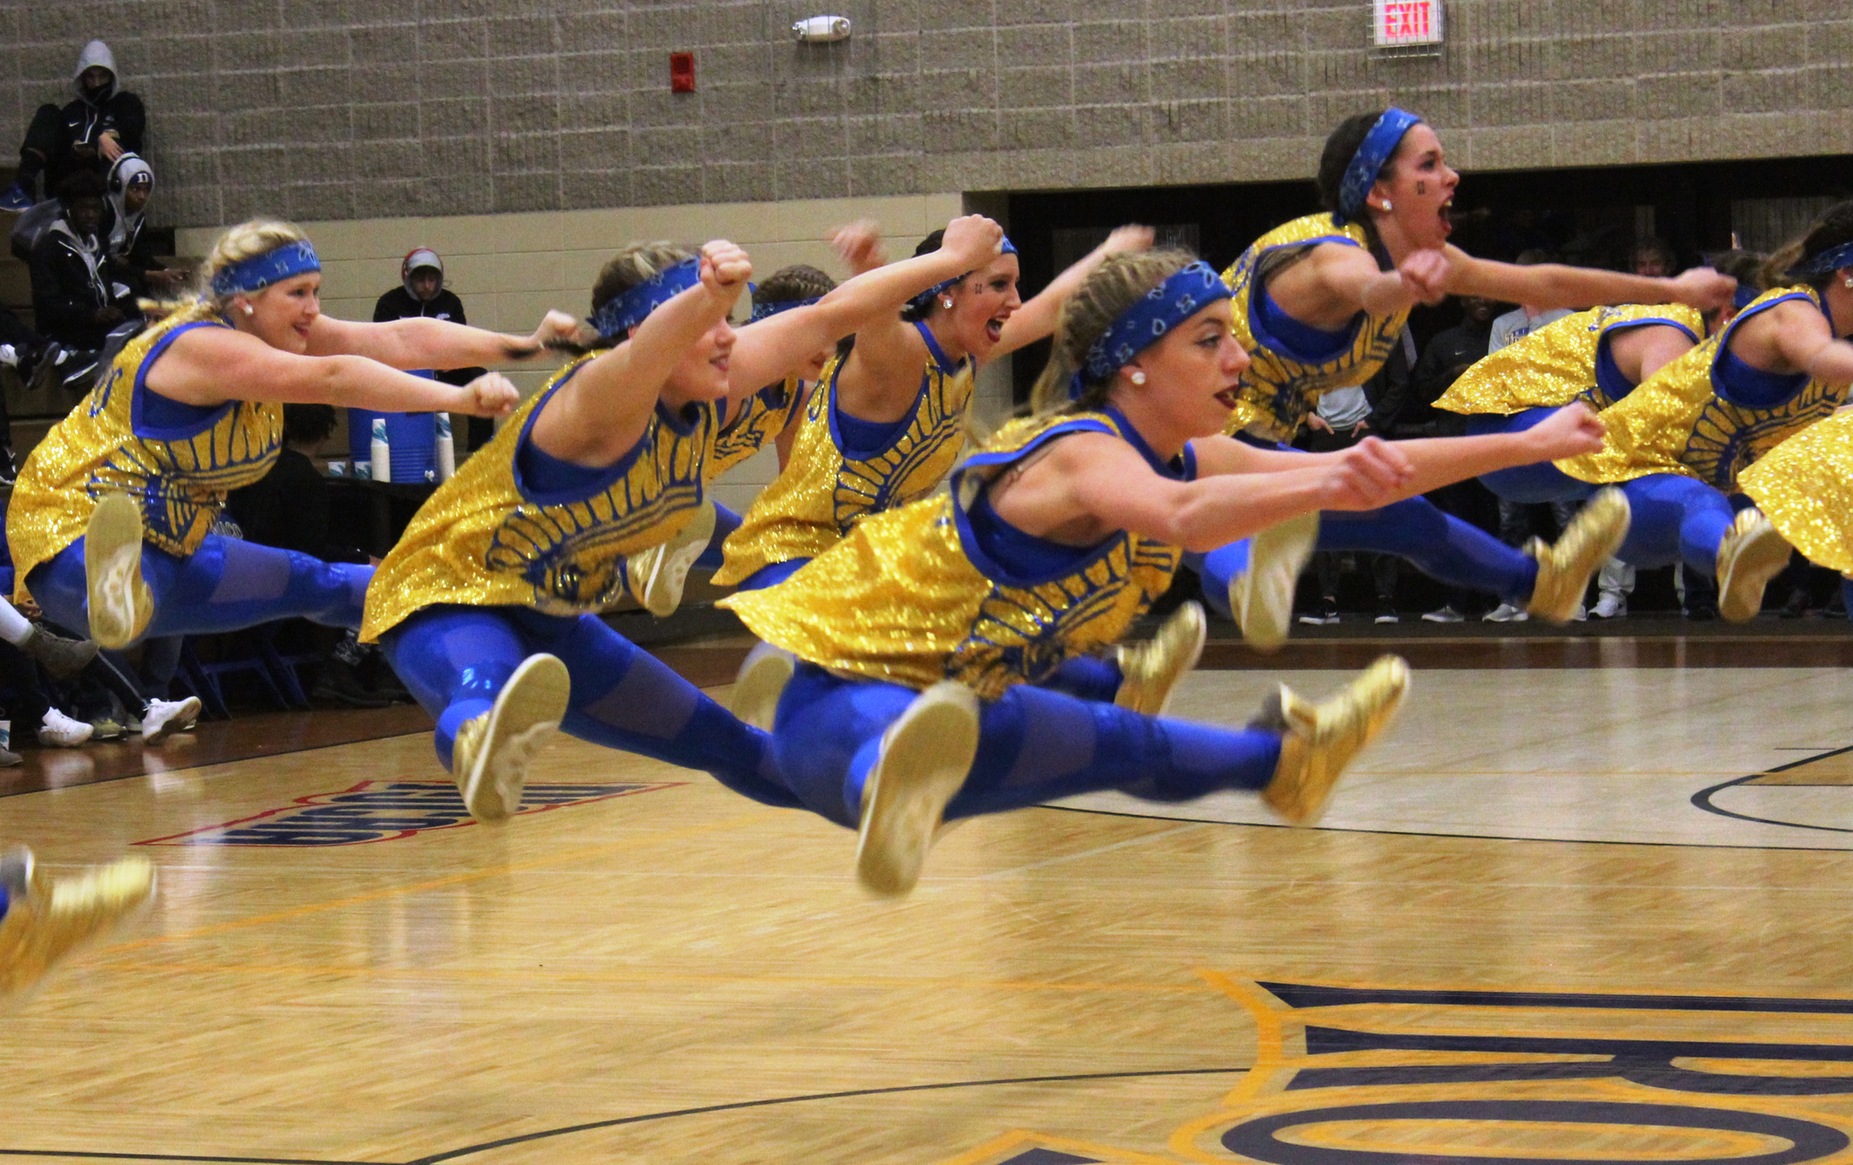 The NIACC Dance Team performs a Hip Hop routine at last week's women's basketball game.